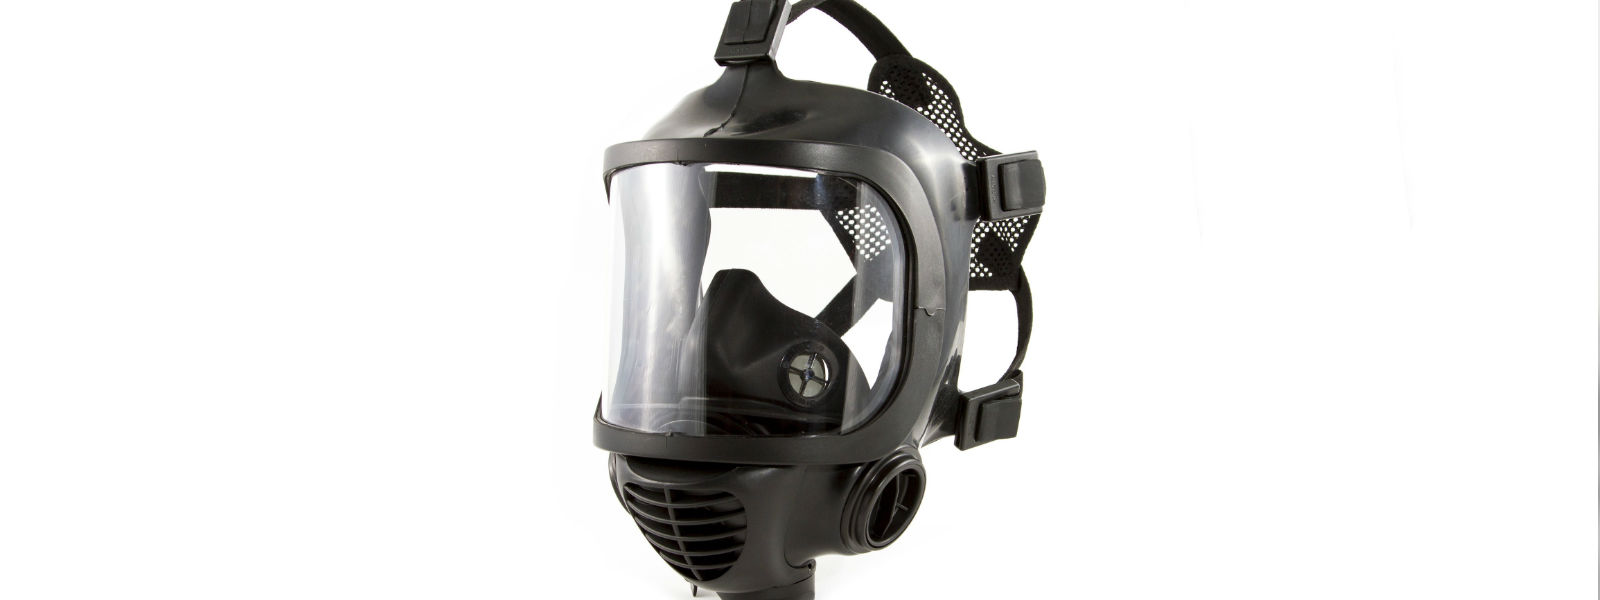 Gas masks were used to manufacture bombs